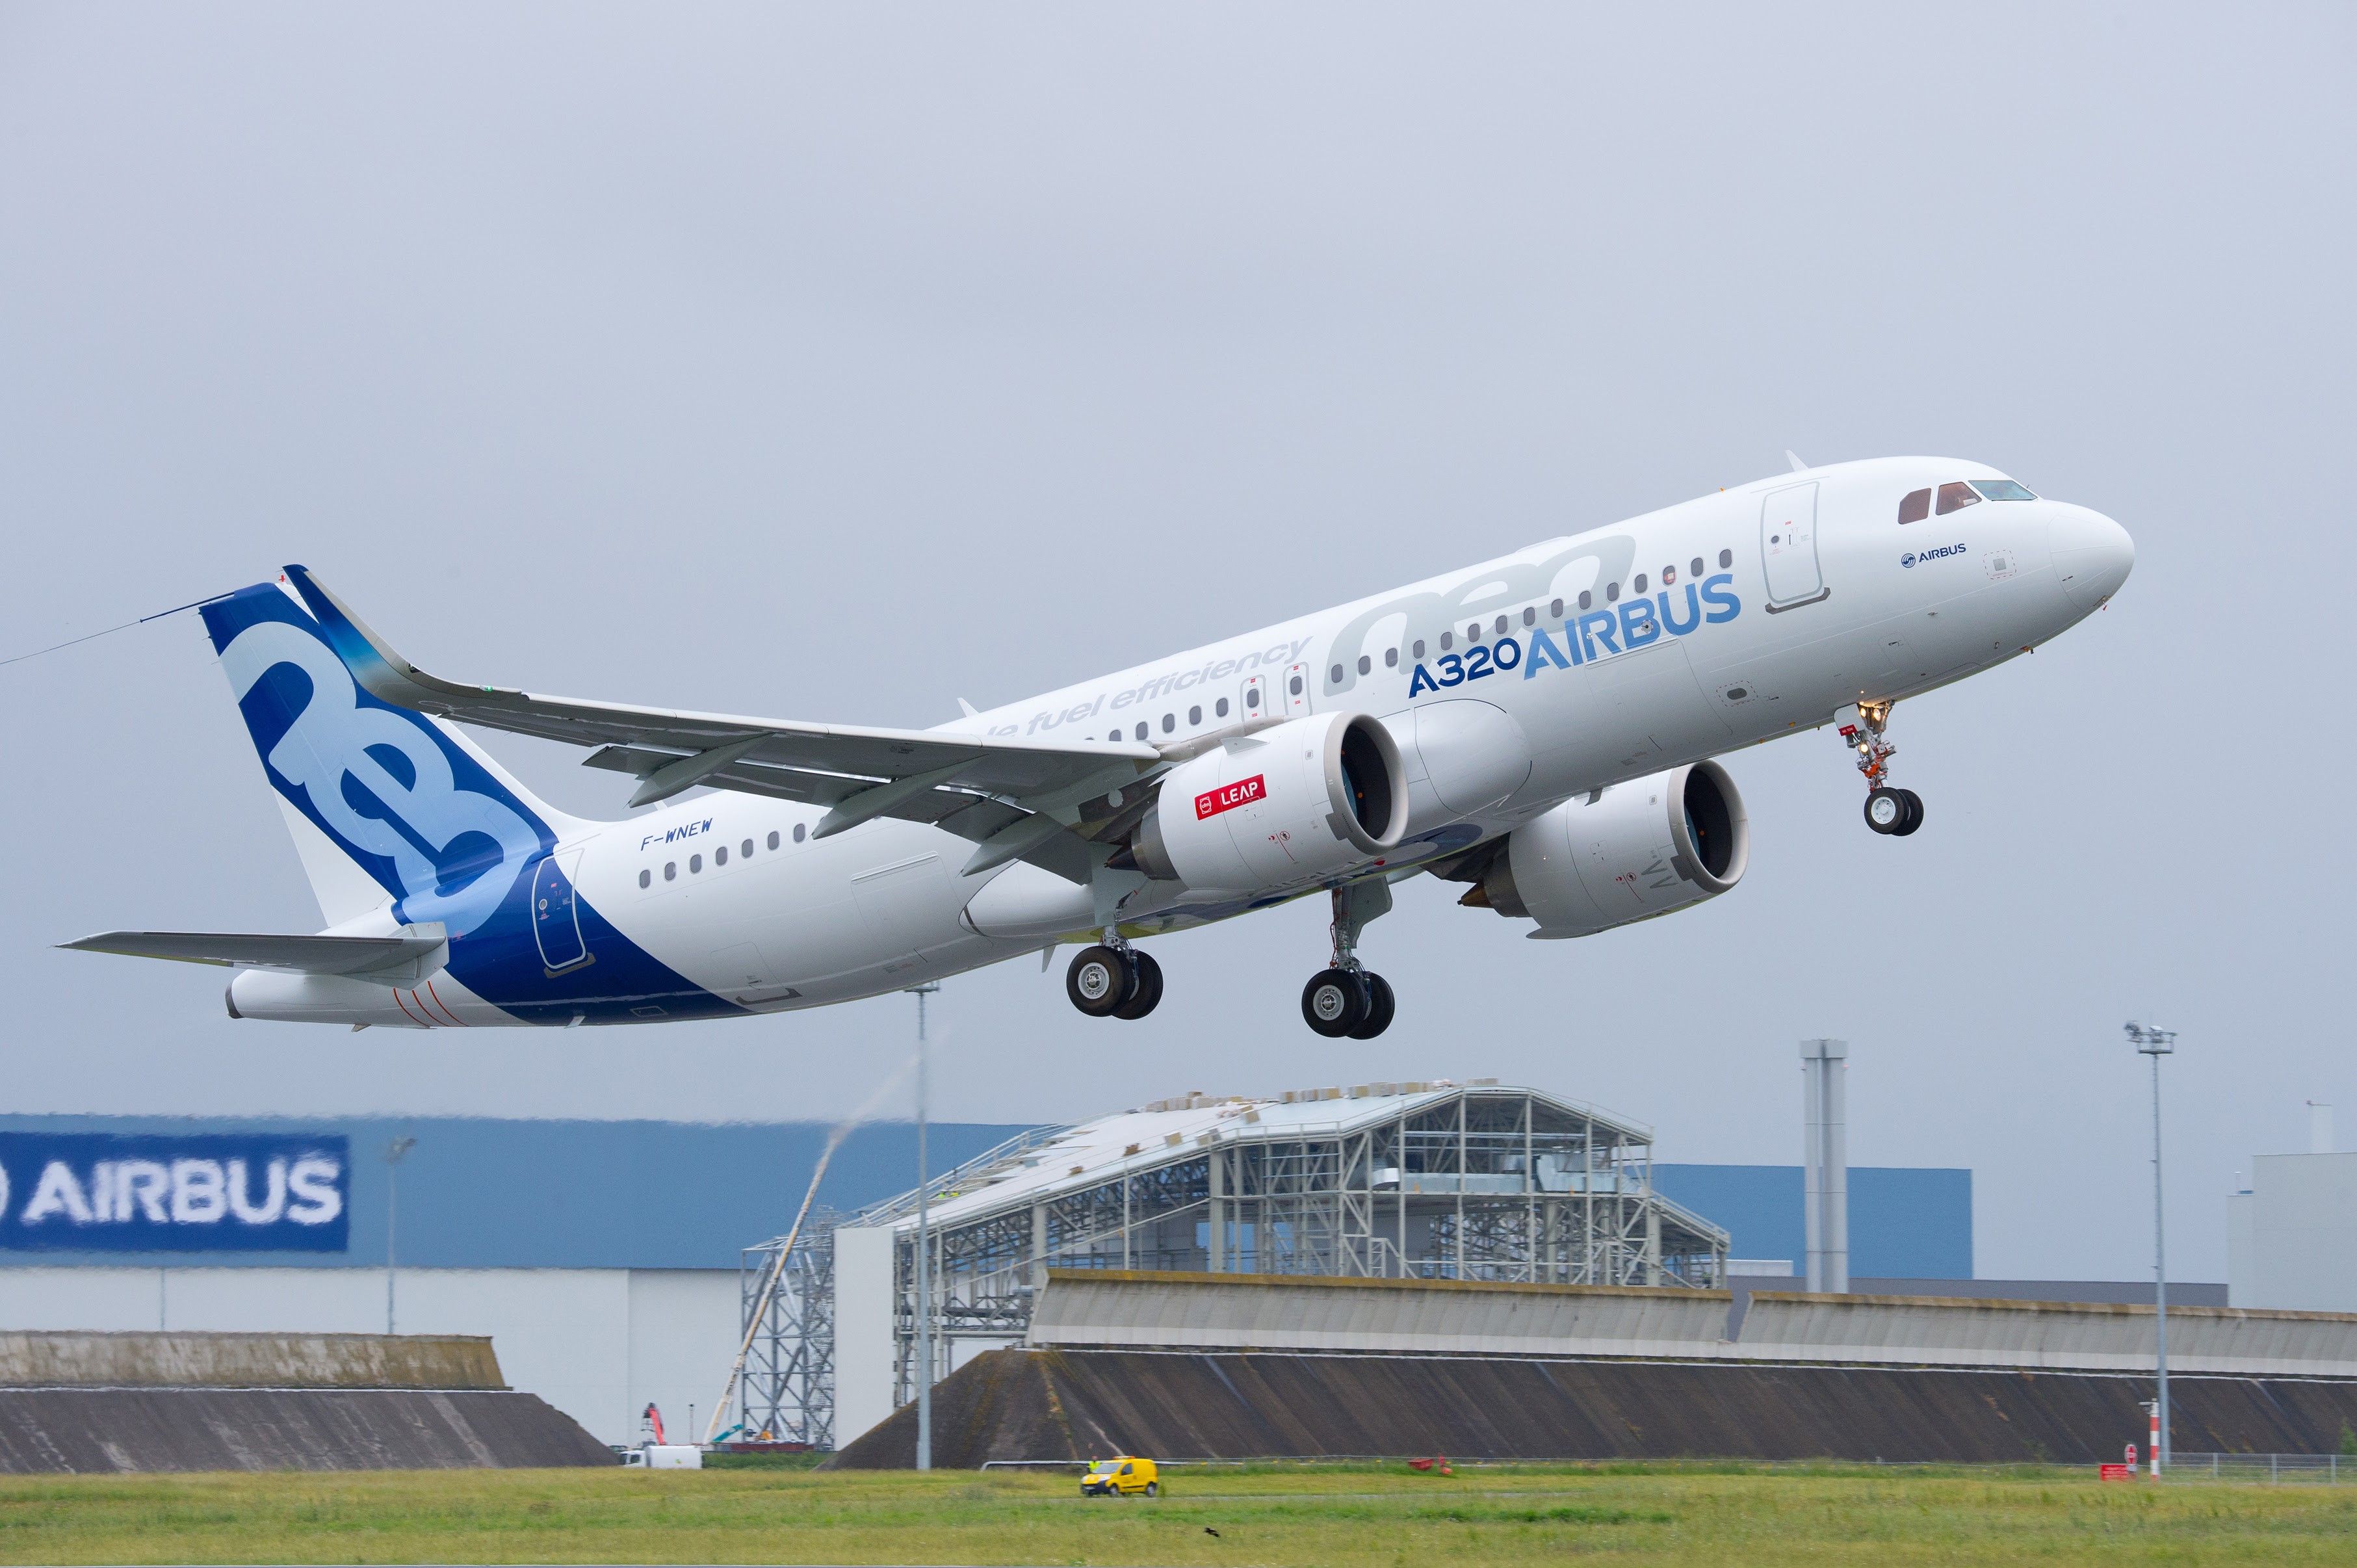 Airbus A320neo aircraft taking off